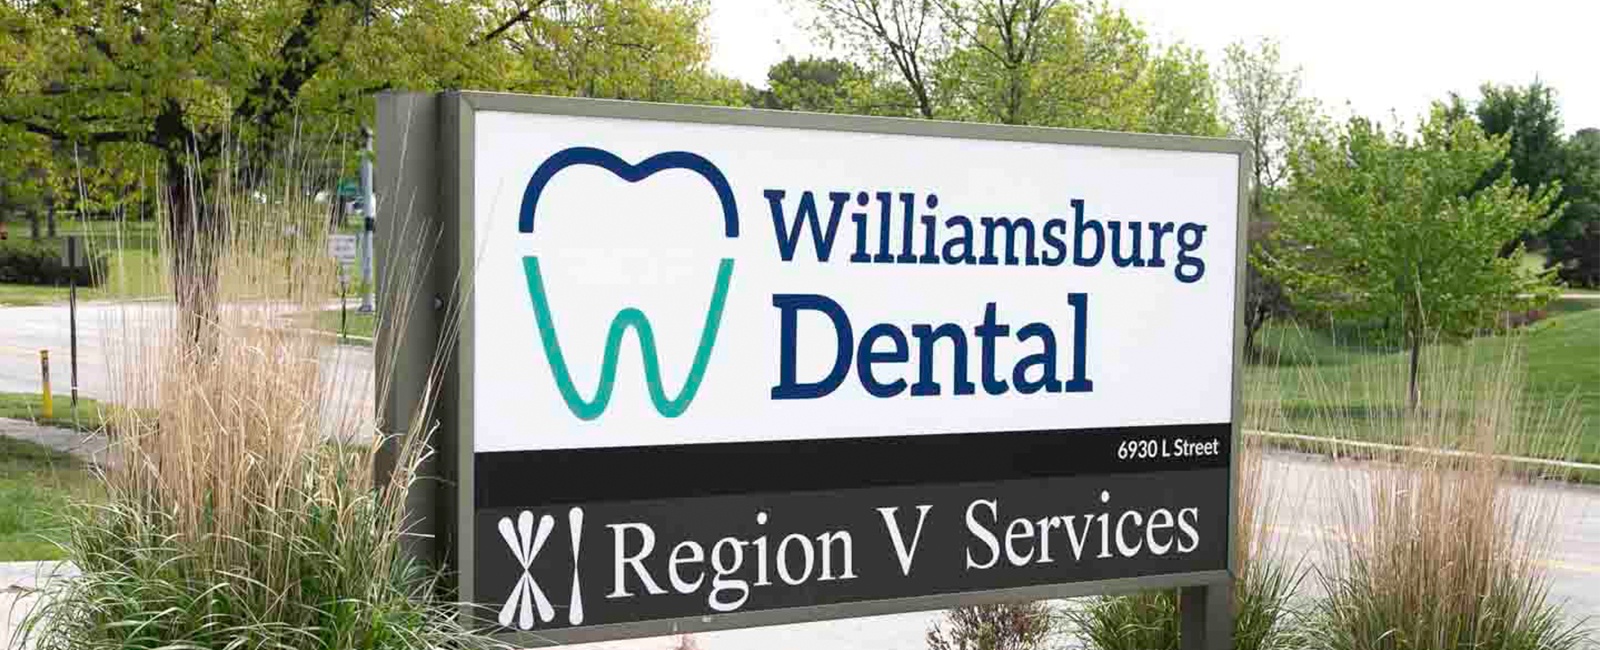 Williamsburg Dental office sign by road